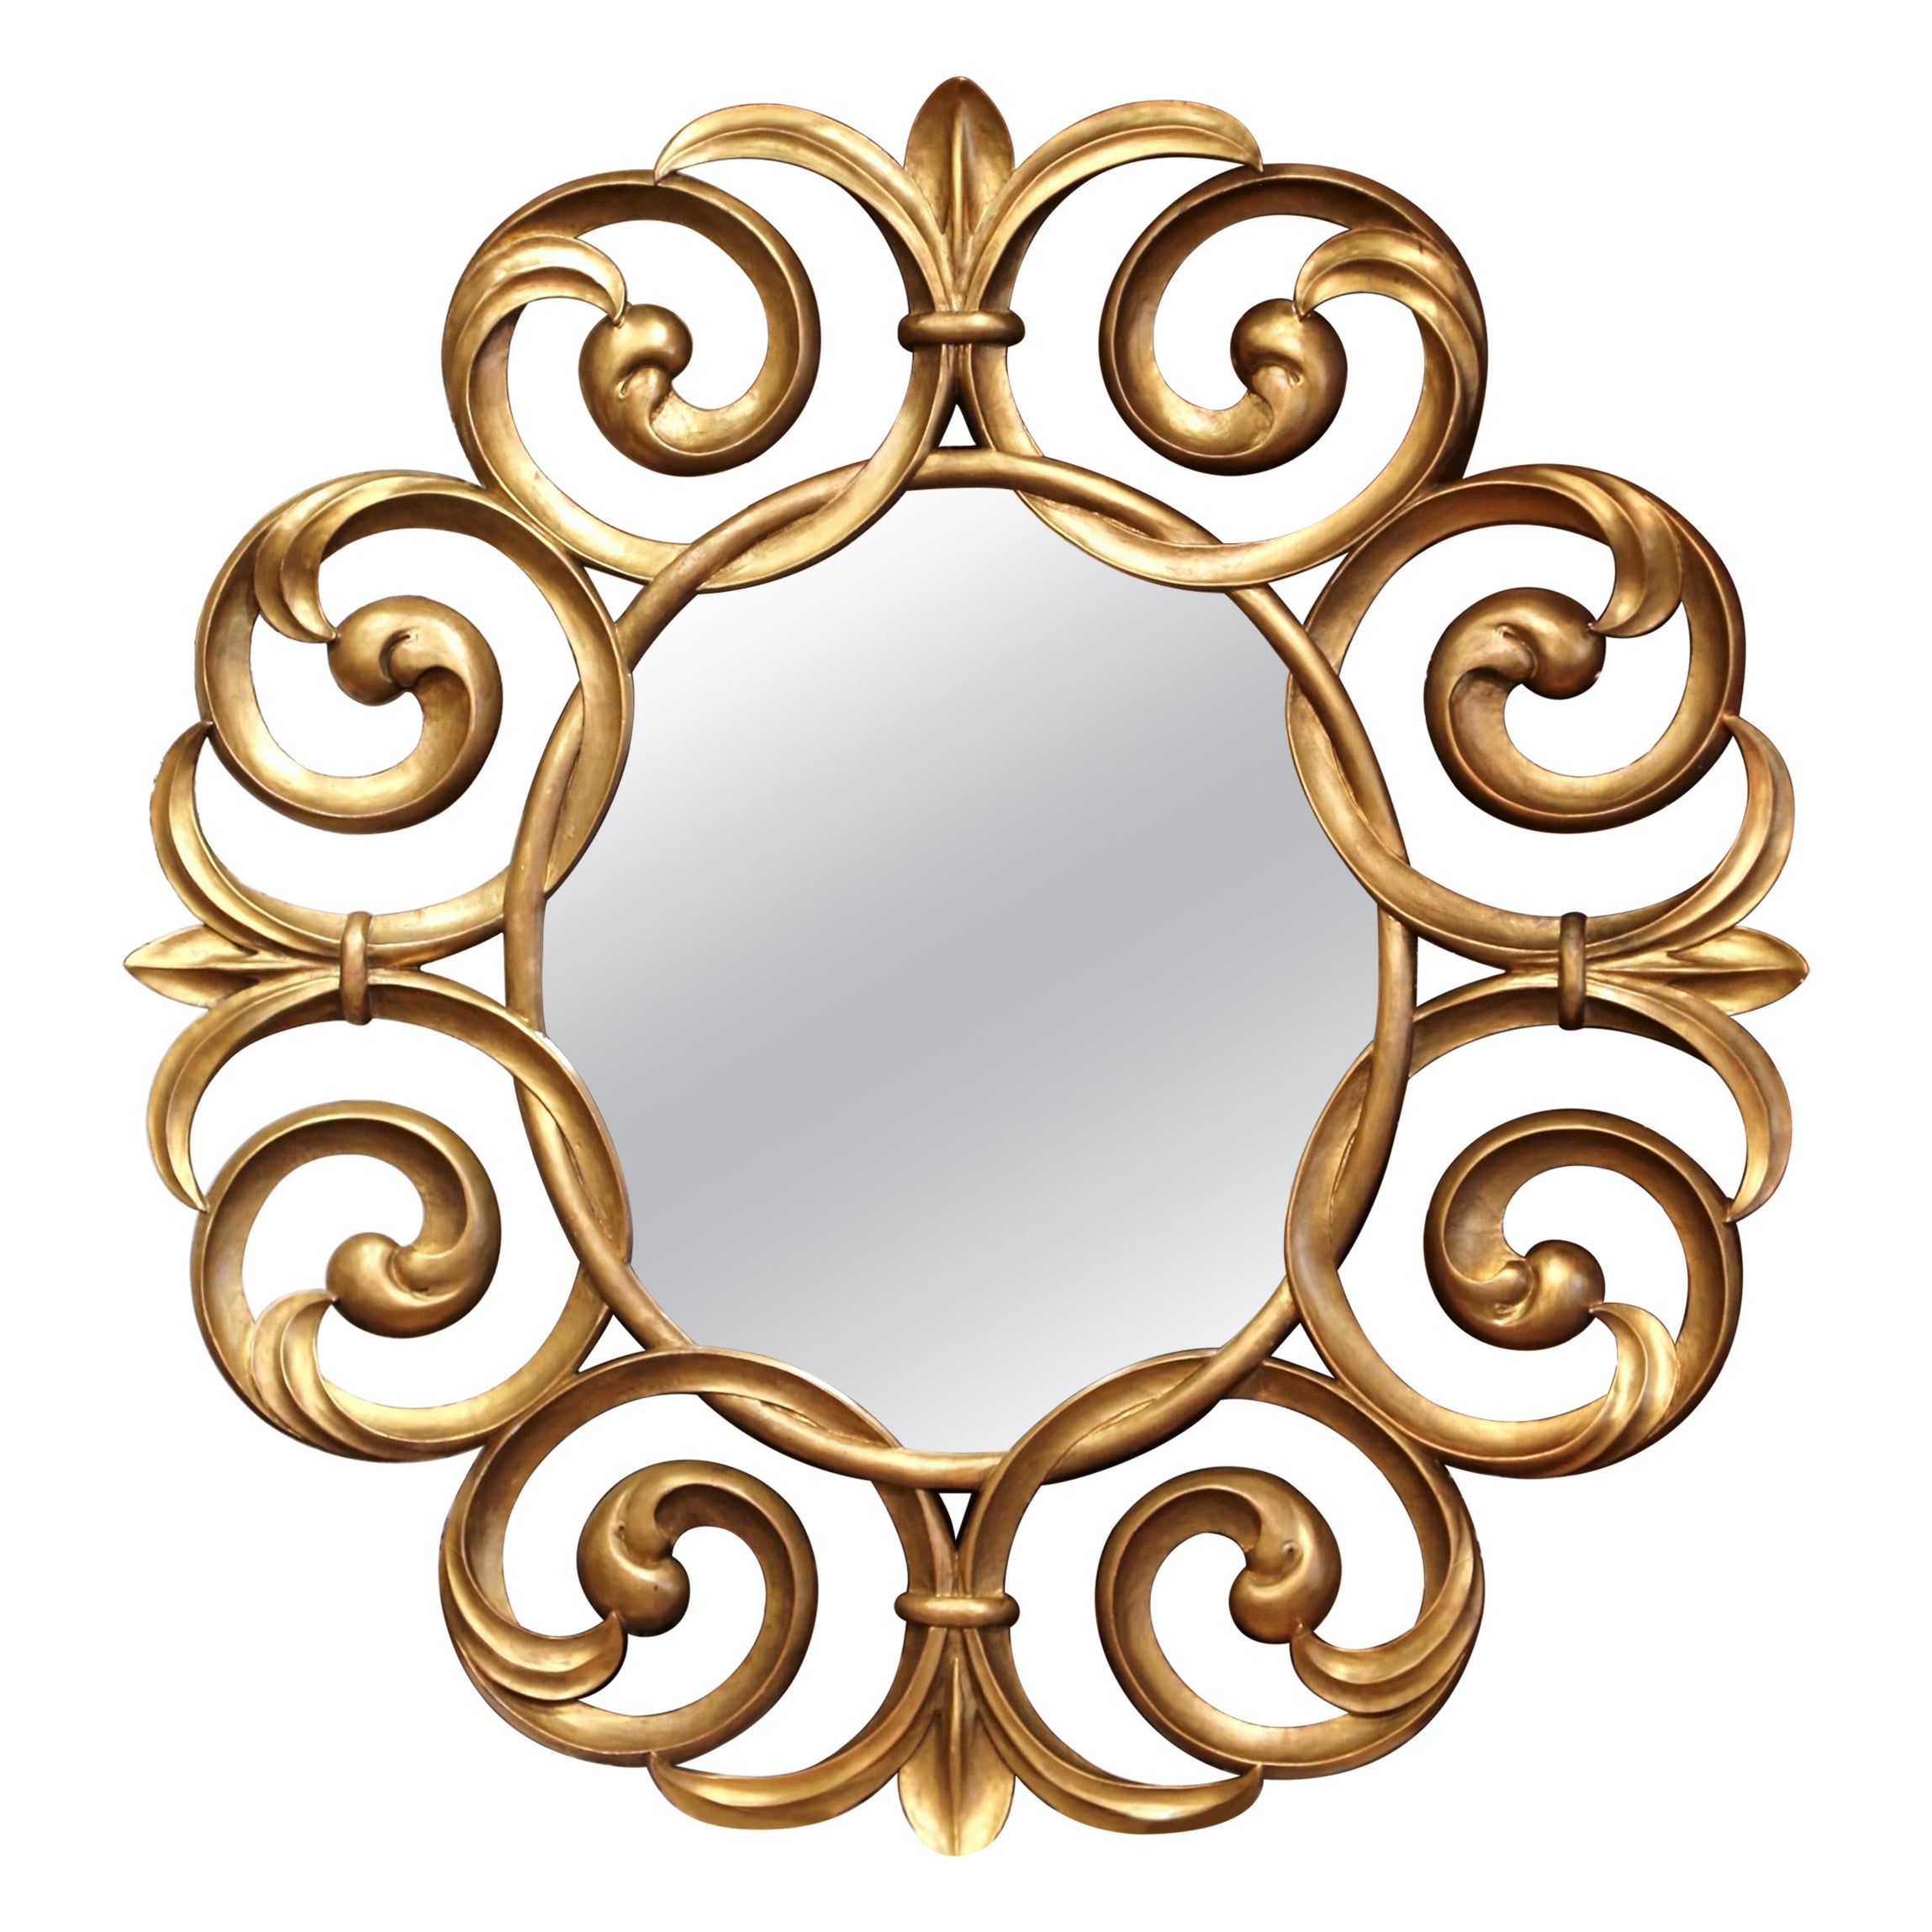 Monumental Early 20th Century French Carved Giltwood Sunburst Mirror